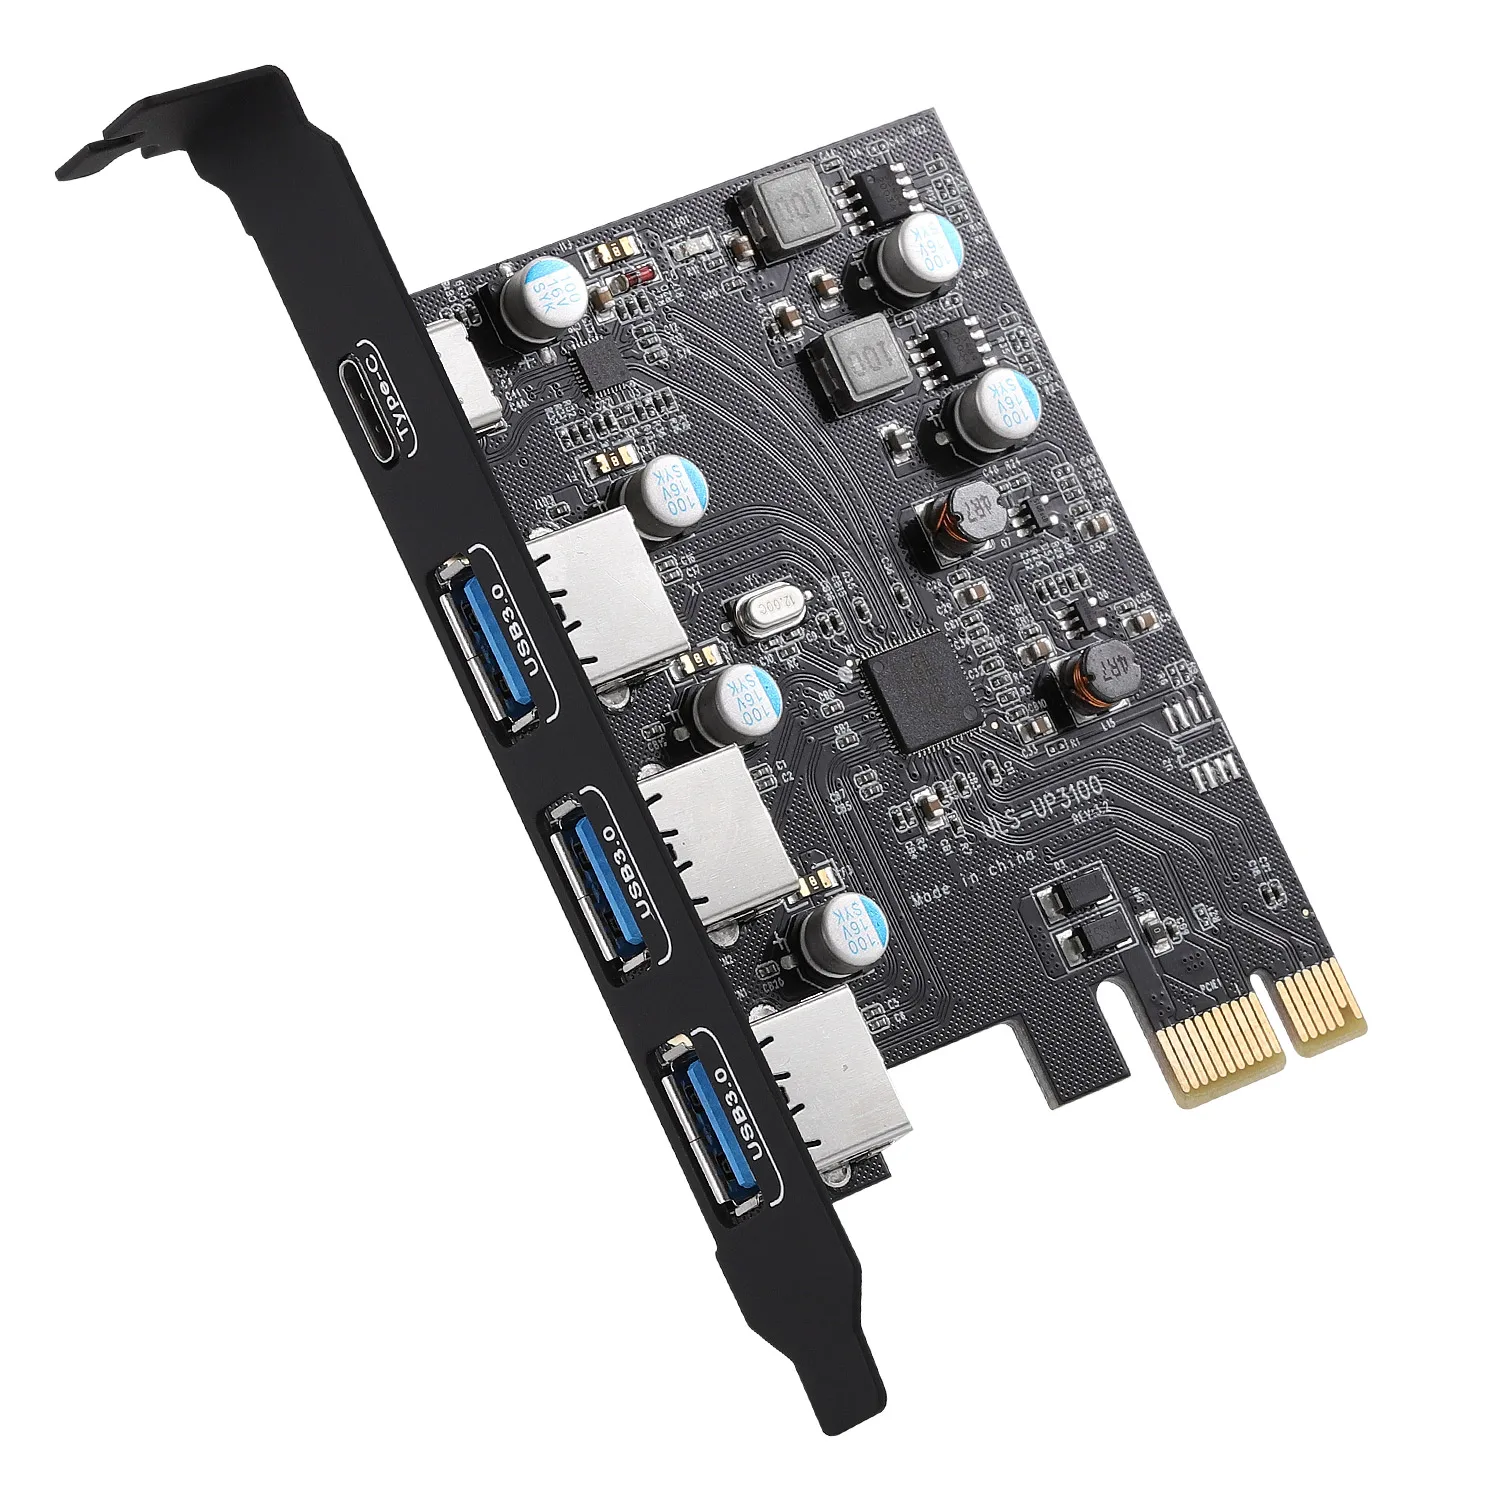 ULS PCI-e USB 3.0 Card Type C(1) USB A(3 ) without Additional Power Supply PCI Express Expansion Card for Windows Mac Pro